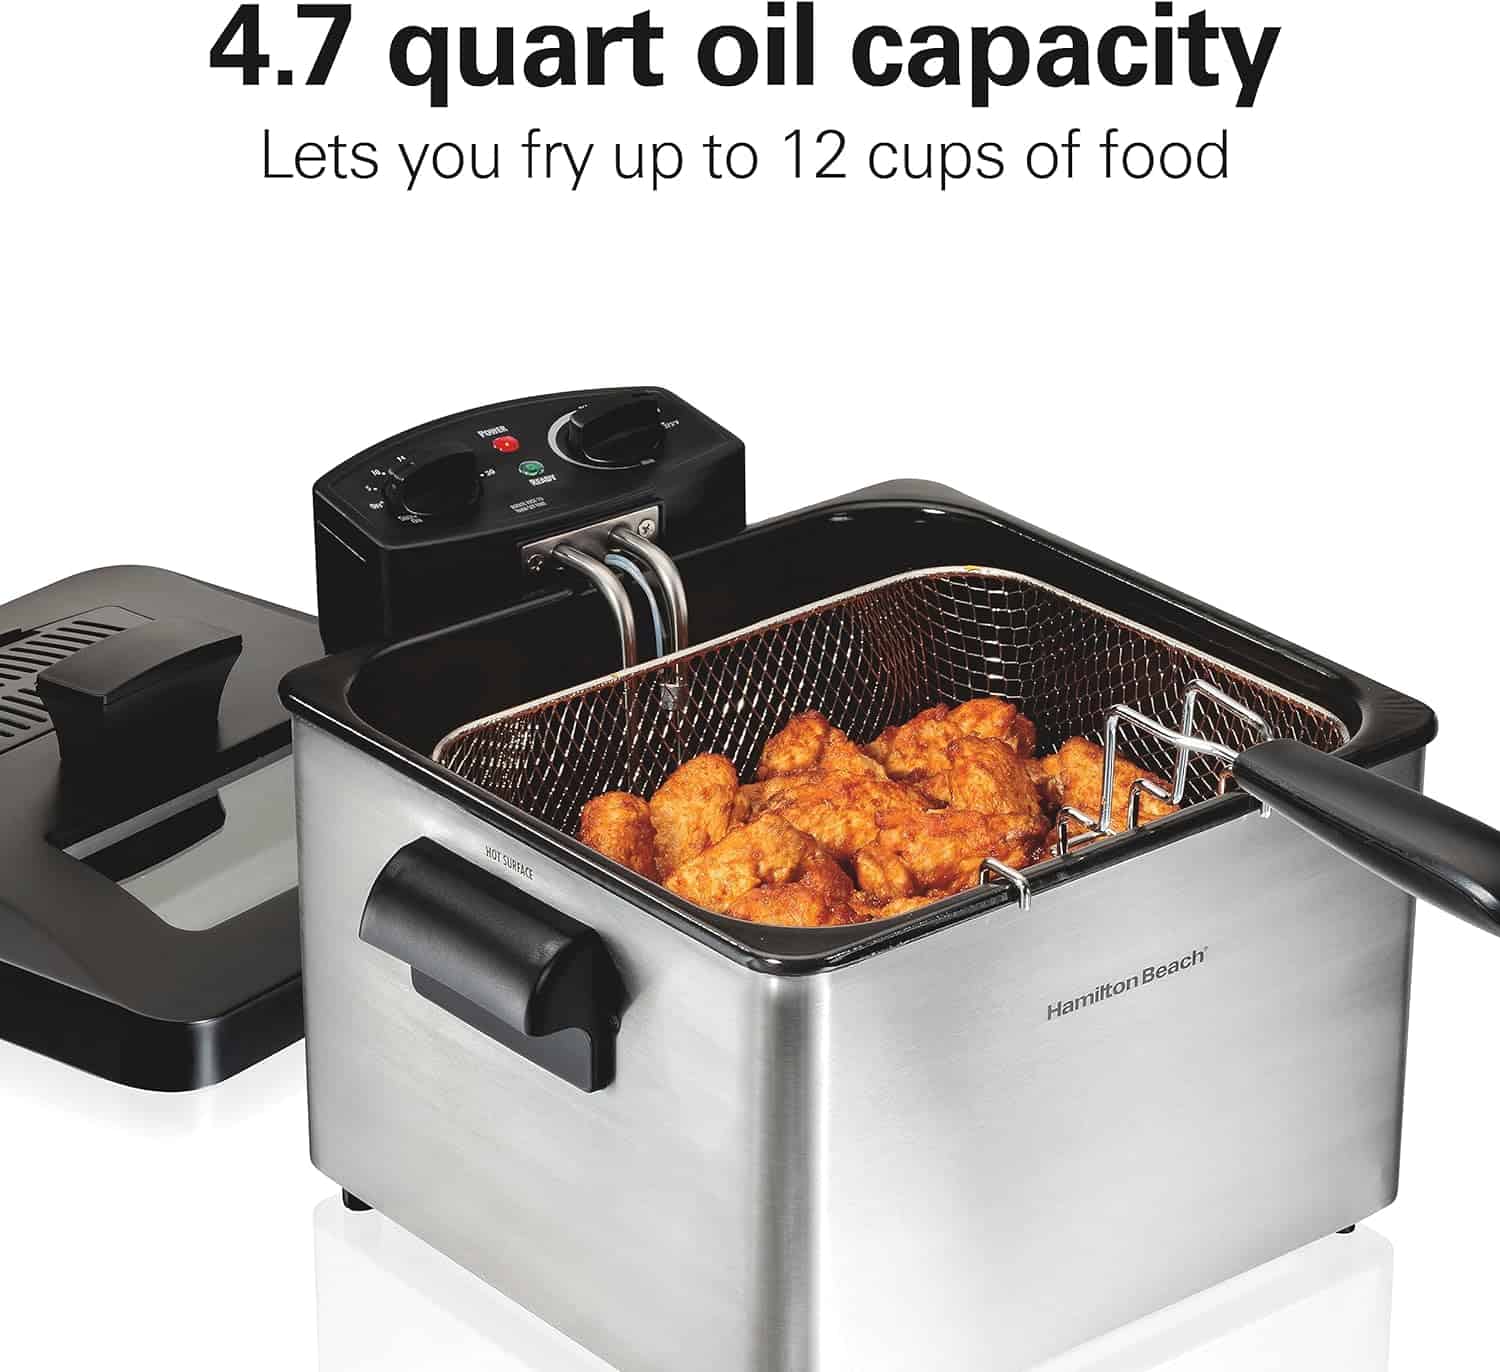 Hamilton Beach Triple Basket Electric Deep Fryer, 4.7 Quarts 19 Cups Oil Capacity, Lid with View Window, Professional Style, 1800 Watts, Stainless Steel (35034) 2